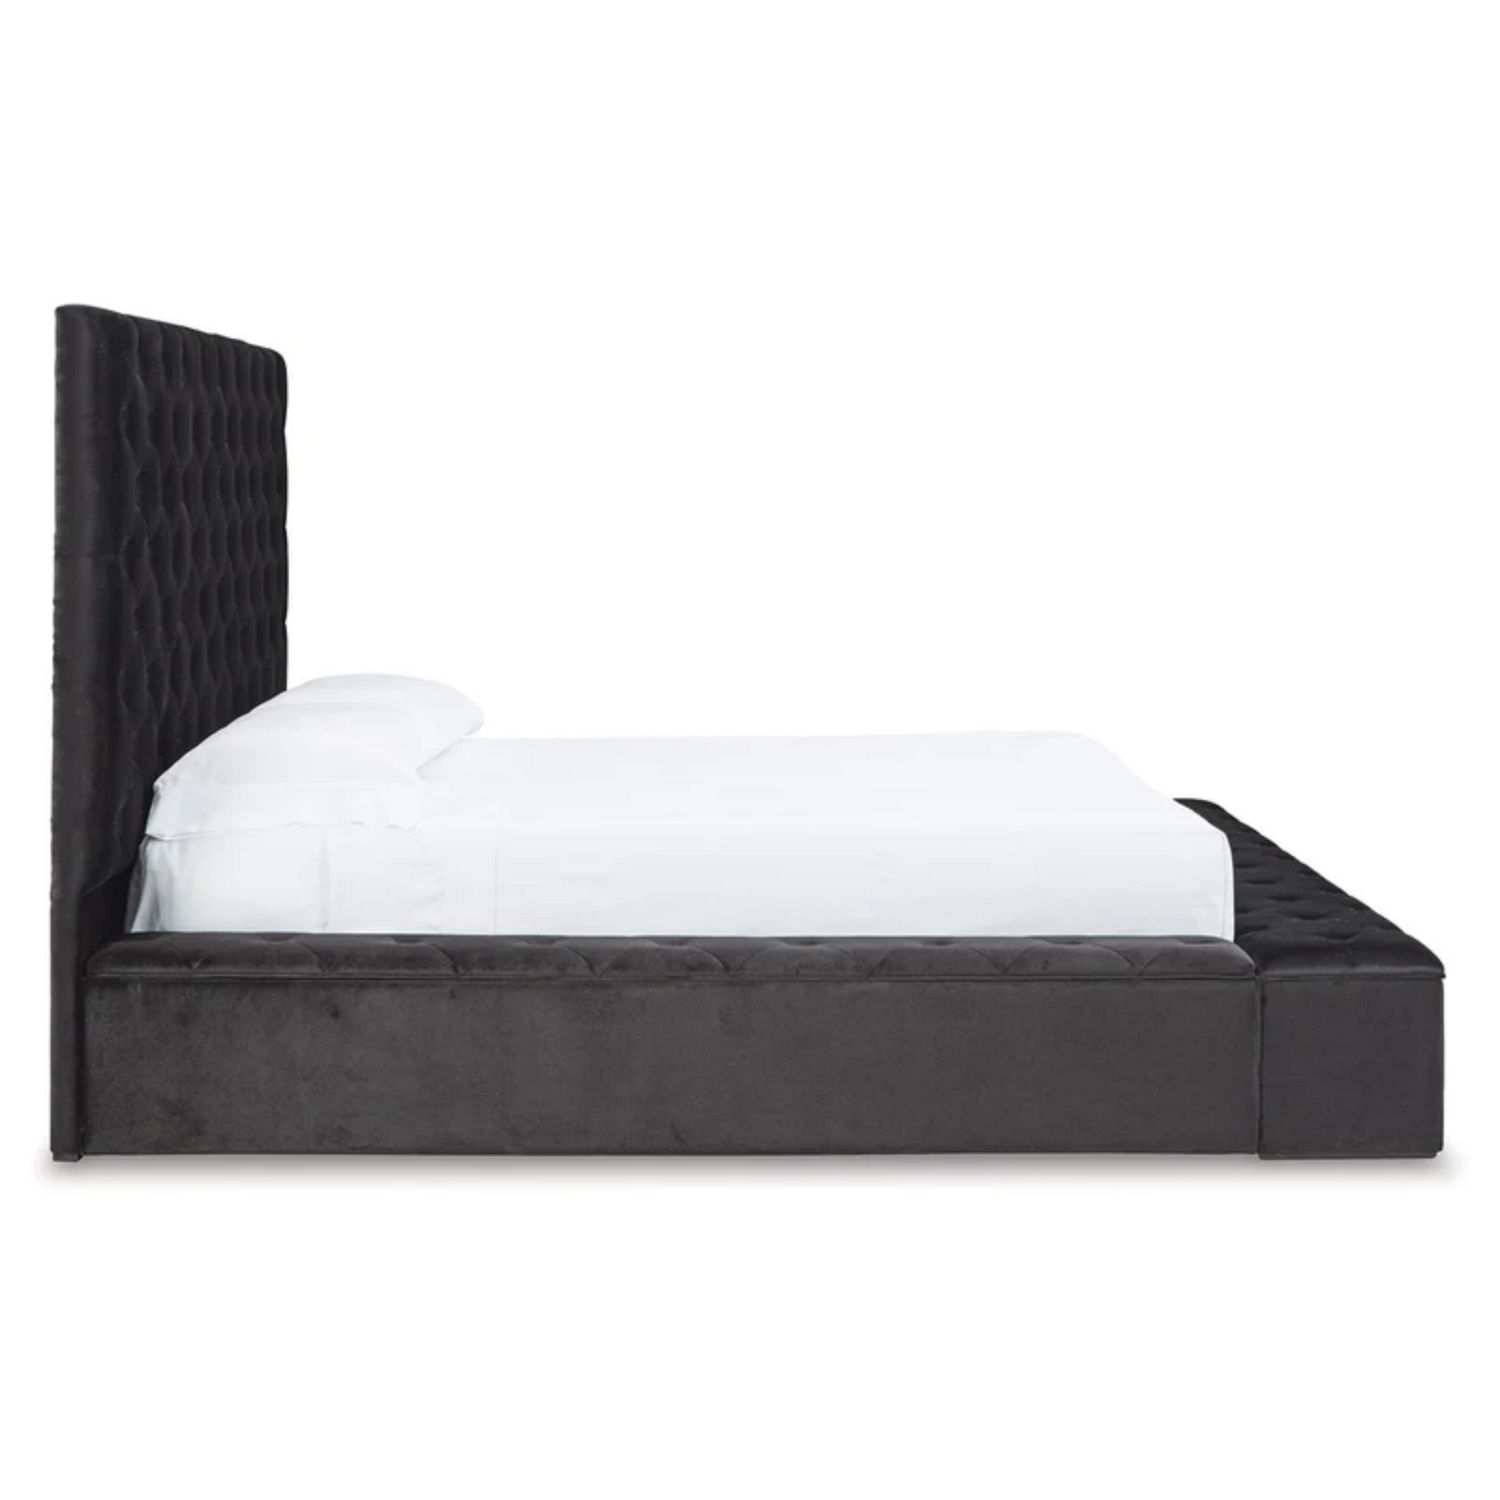 Lindenfield Black King Upholstered Bed with Storage